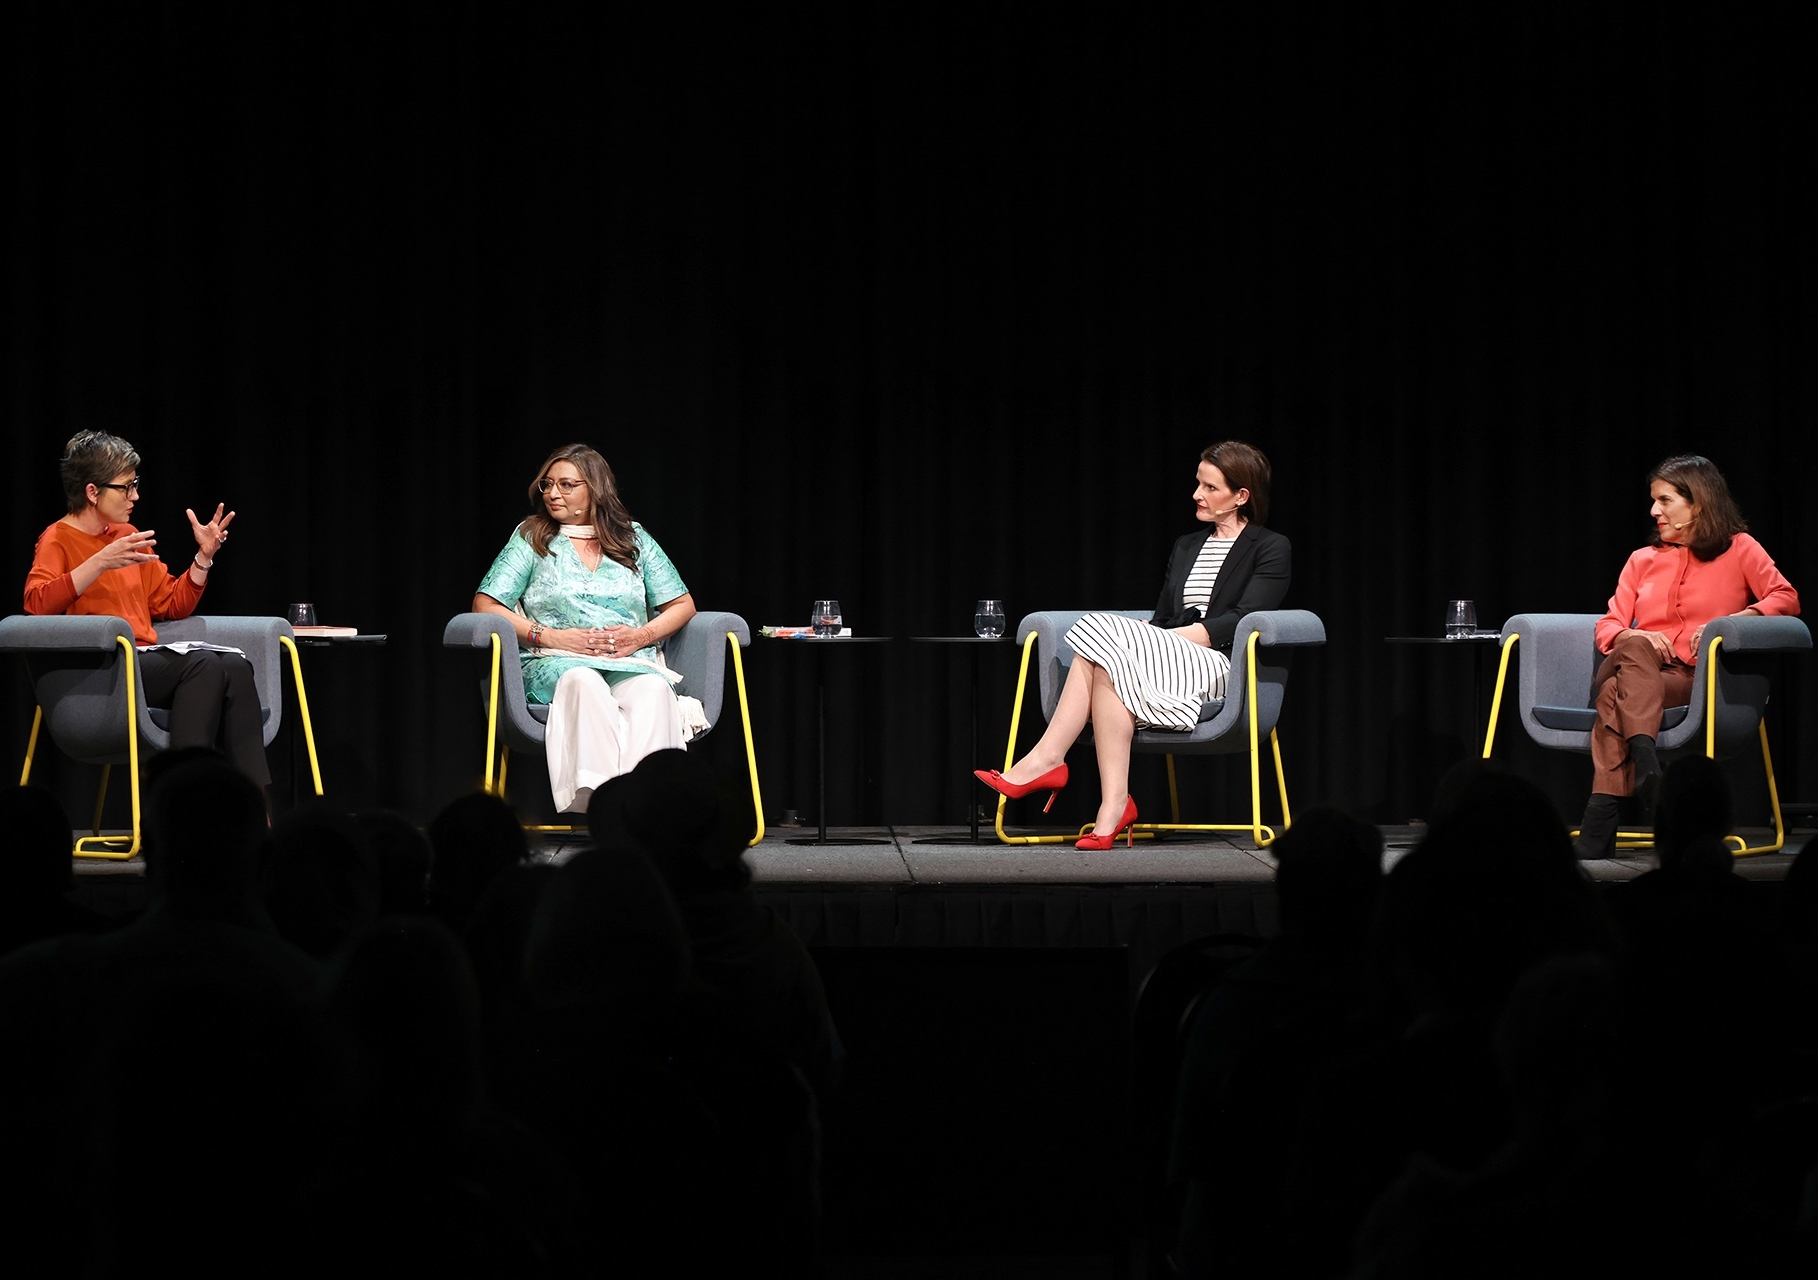 Professor Rosalind Dixon, Greens Senator Dr Mehreen Faruqi, Independent candidate Georgia Steele and former Federal MP Julia Banks discuss gender equality at the Centre for Ideas ‘Vote for Women’ event. Photo: Prudence Upton